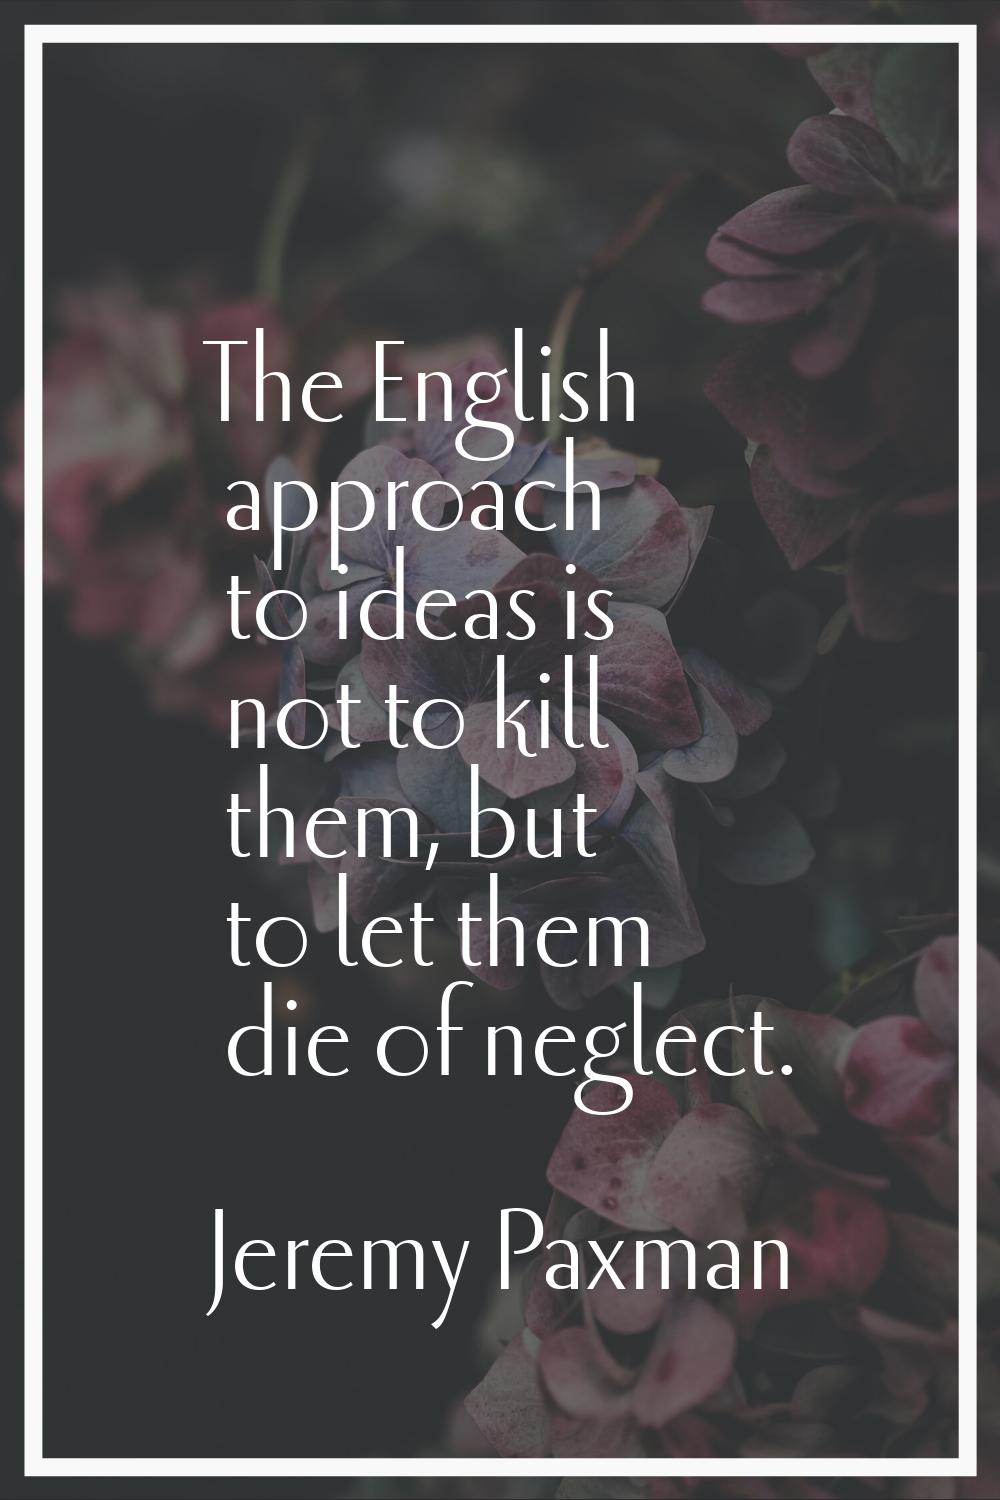 The English approach to ideas is not to kill them, but to let them die of neglect.